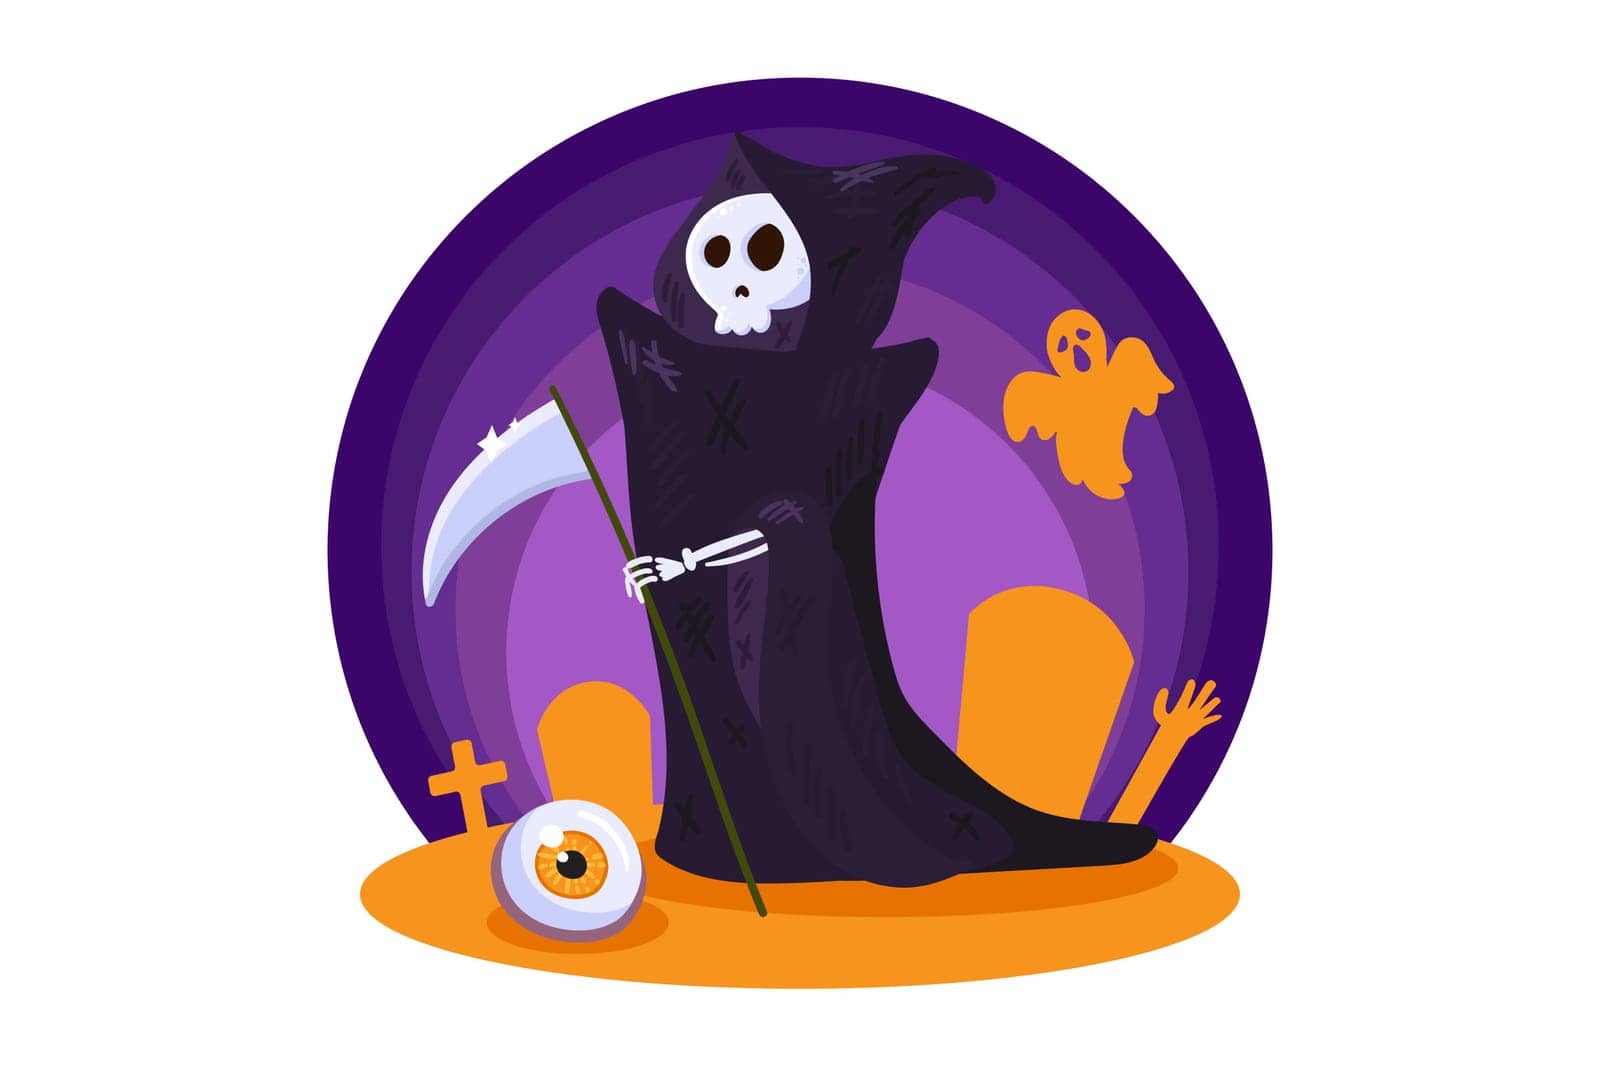 Death character for Halloween party night decoration. Template design element with Halloween symbol for card, invitation or background. Flat vector illustration